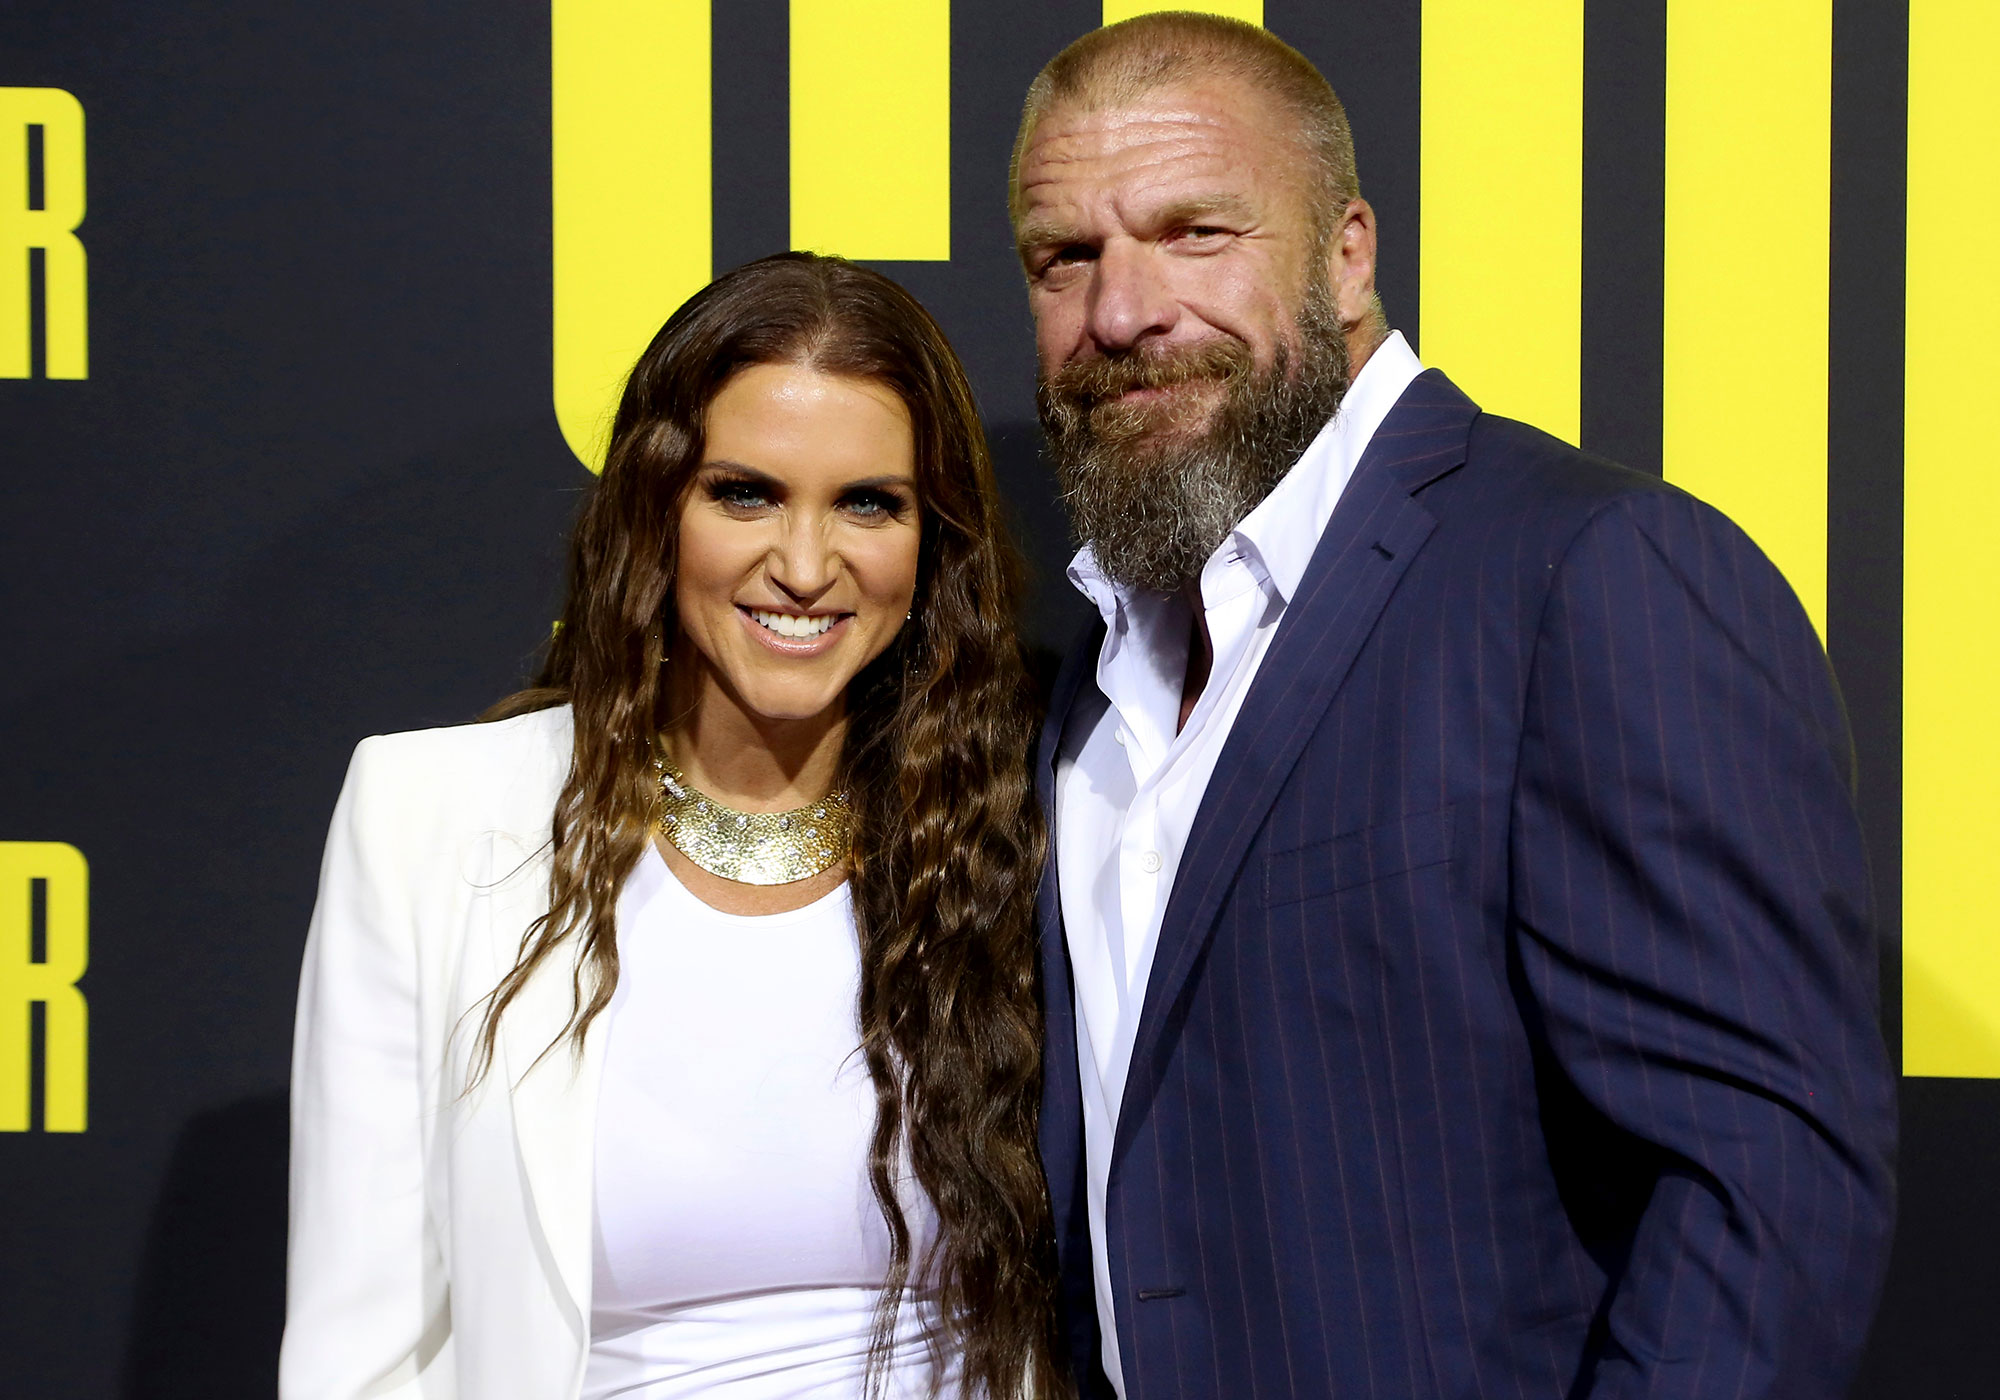 WWE's Stephanie McMahon and Wrestler Triple H's Relationship Timeline